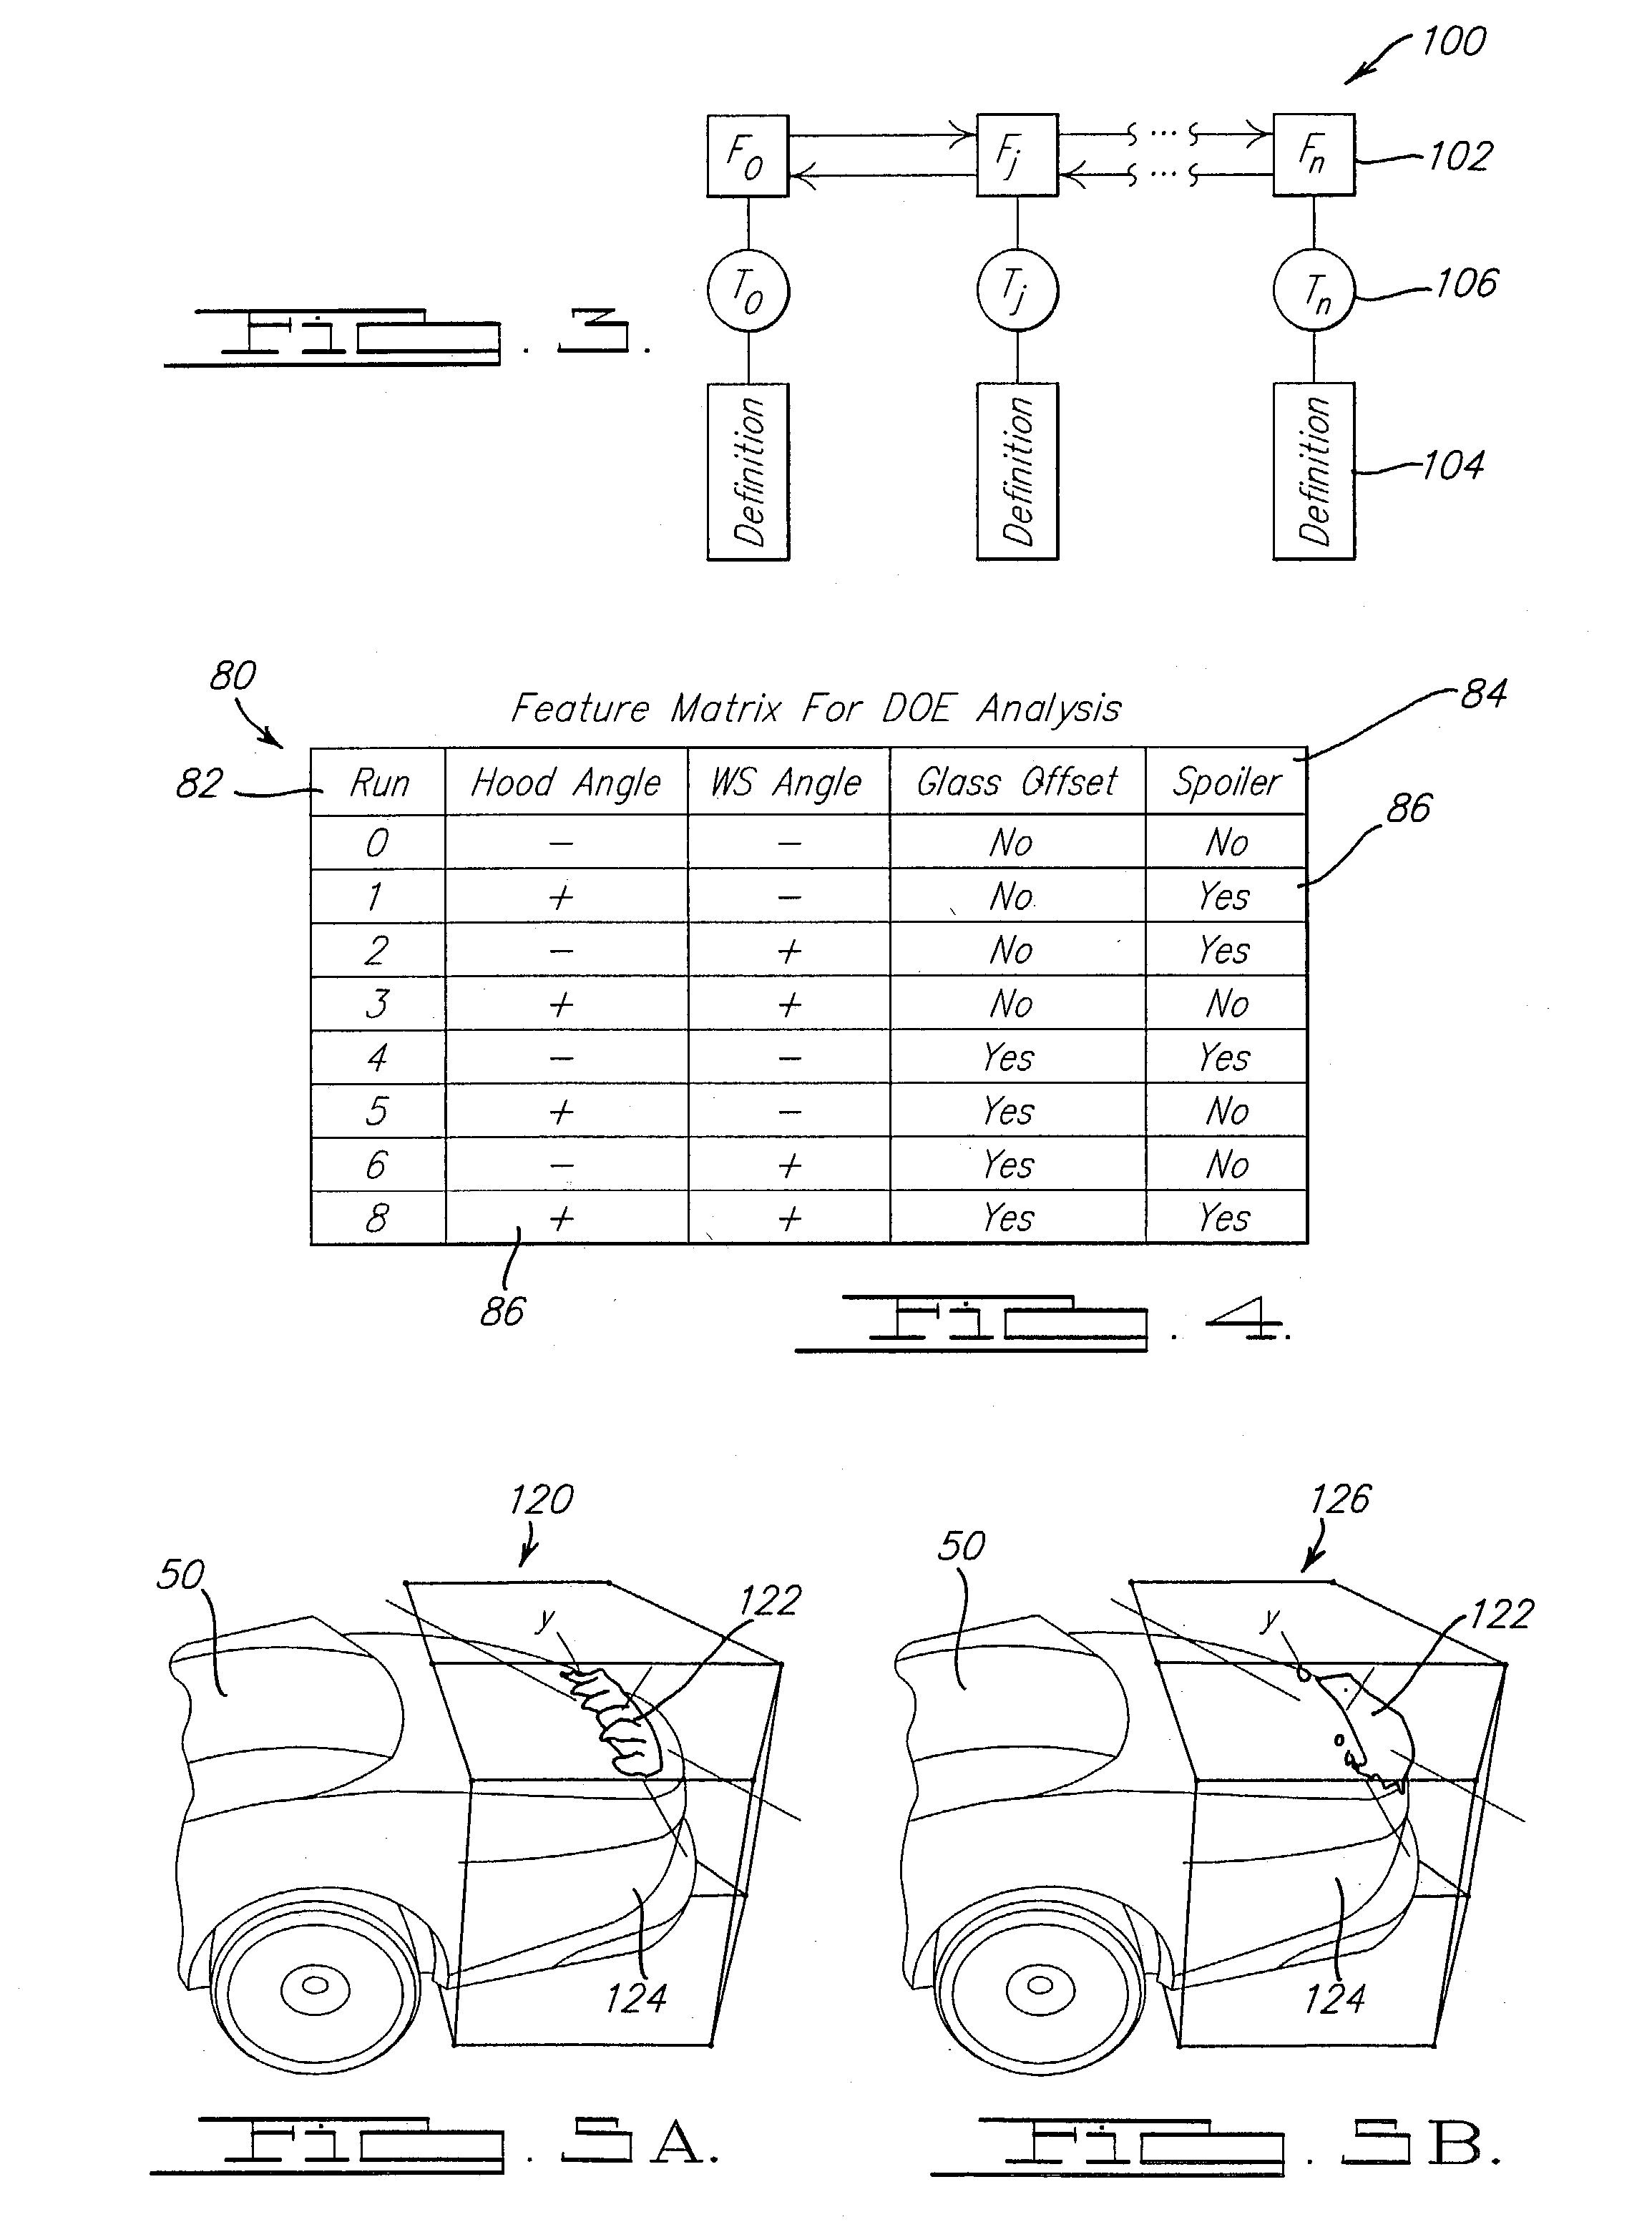 System and method of interactively generating a family of mesh models